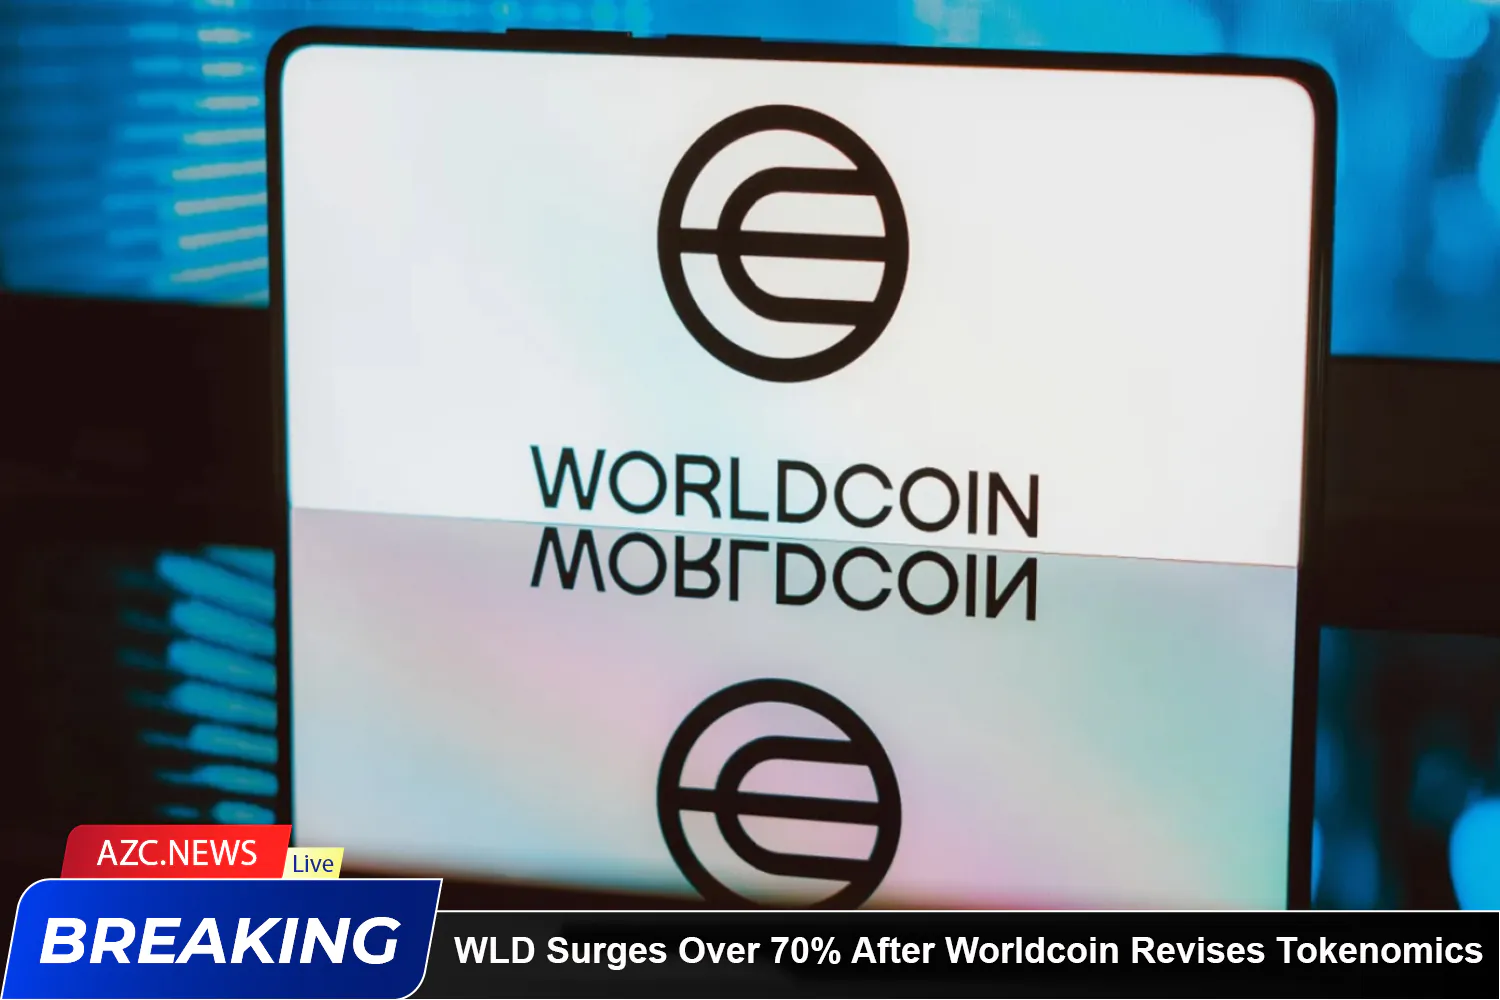 Wld Surges Over 70% After Worldcoin Revises Tokenomics